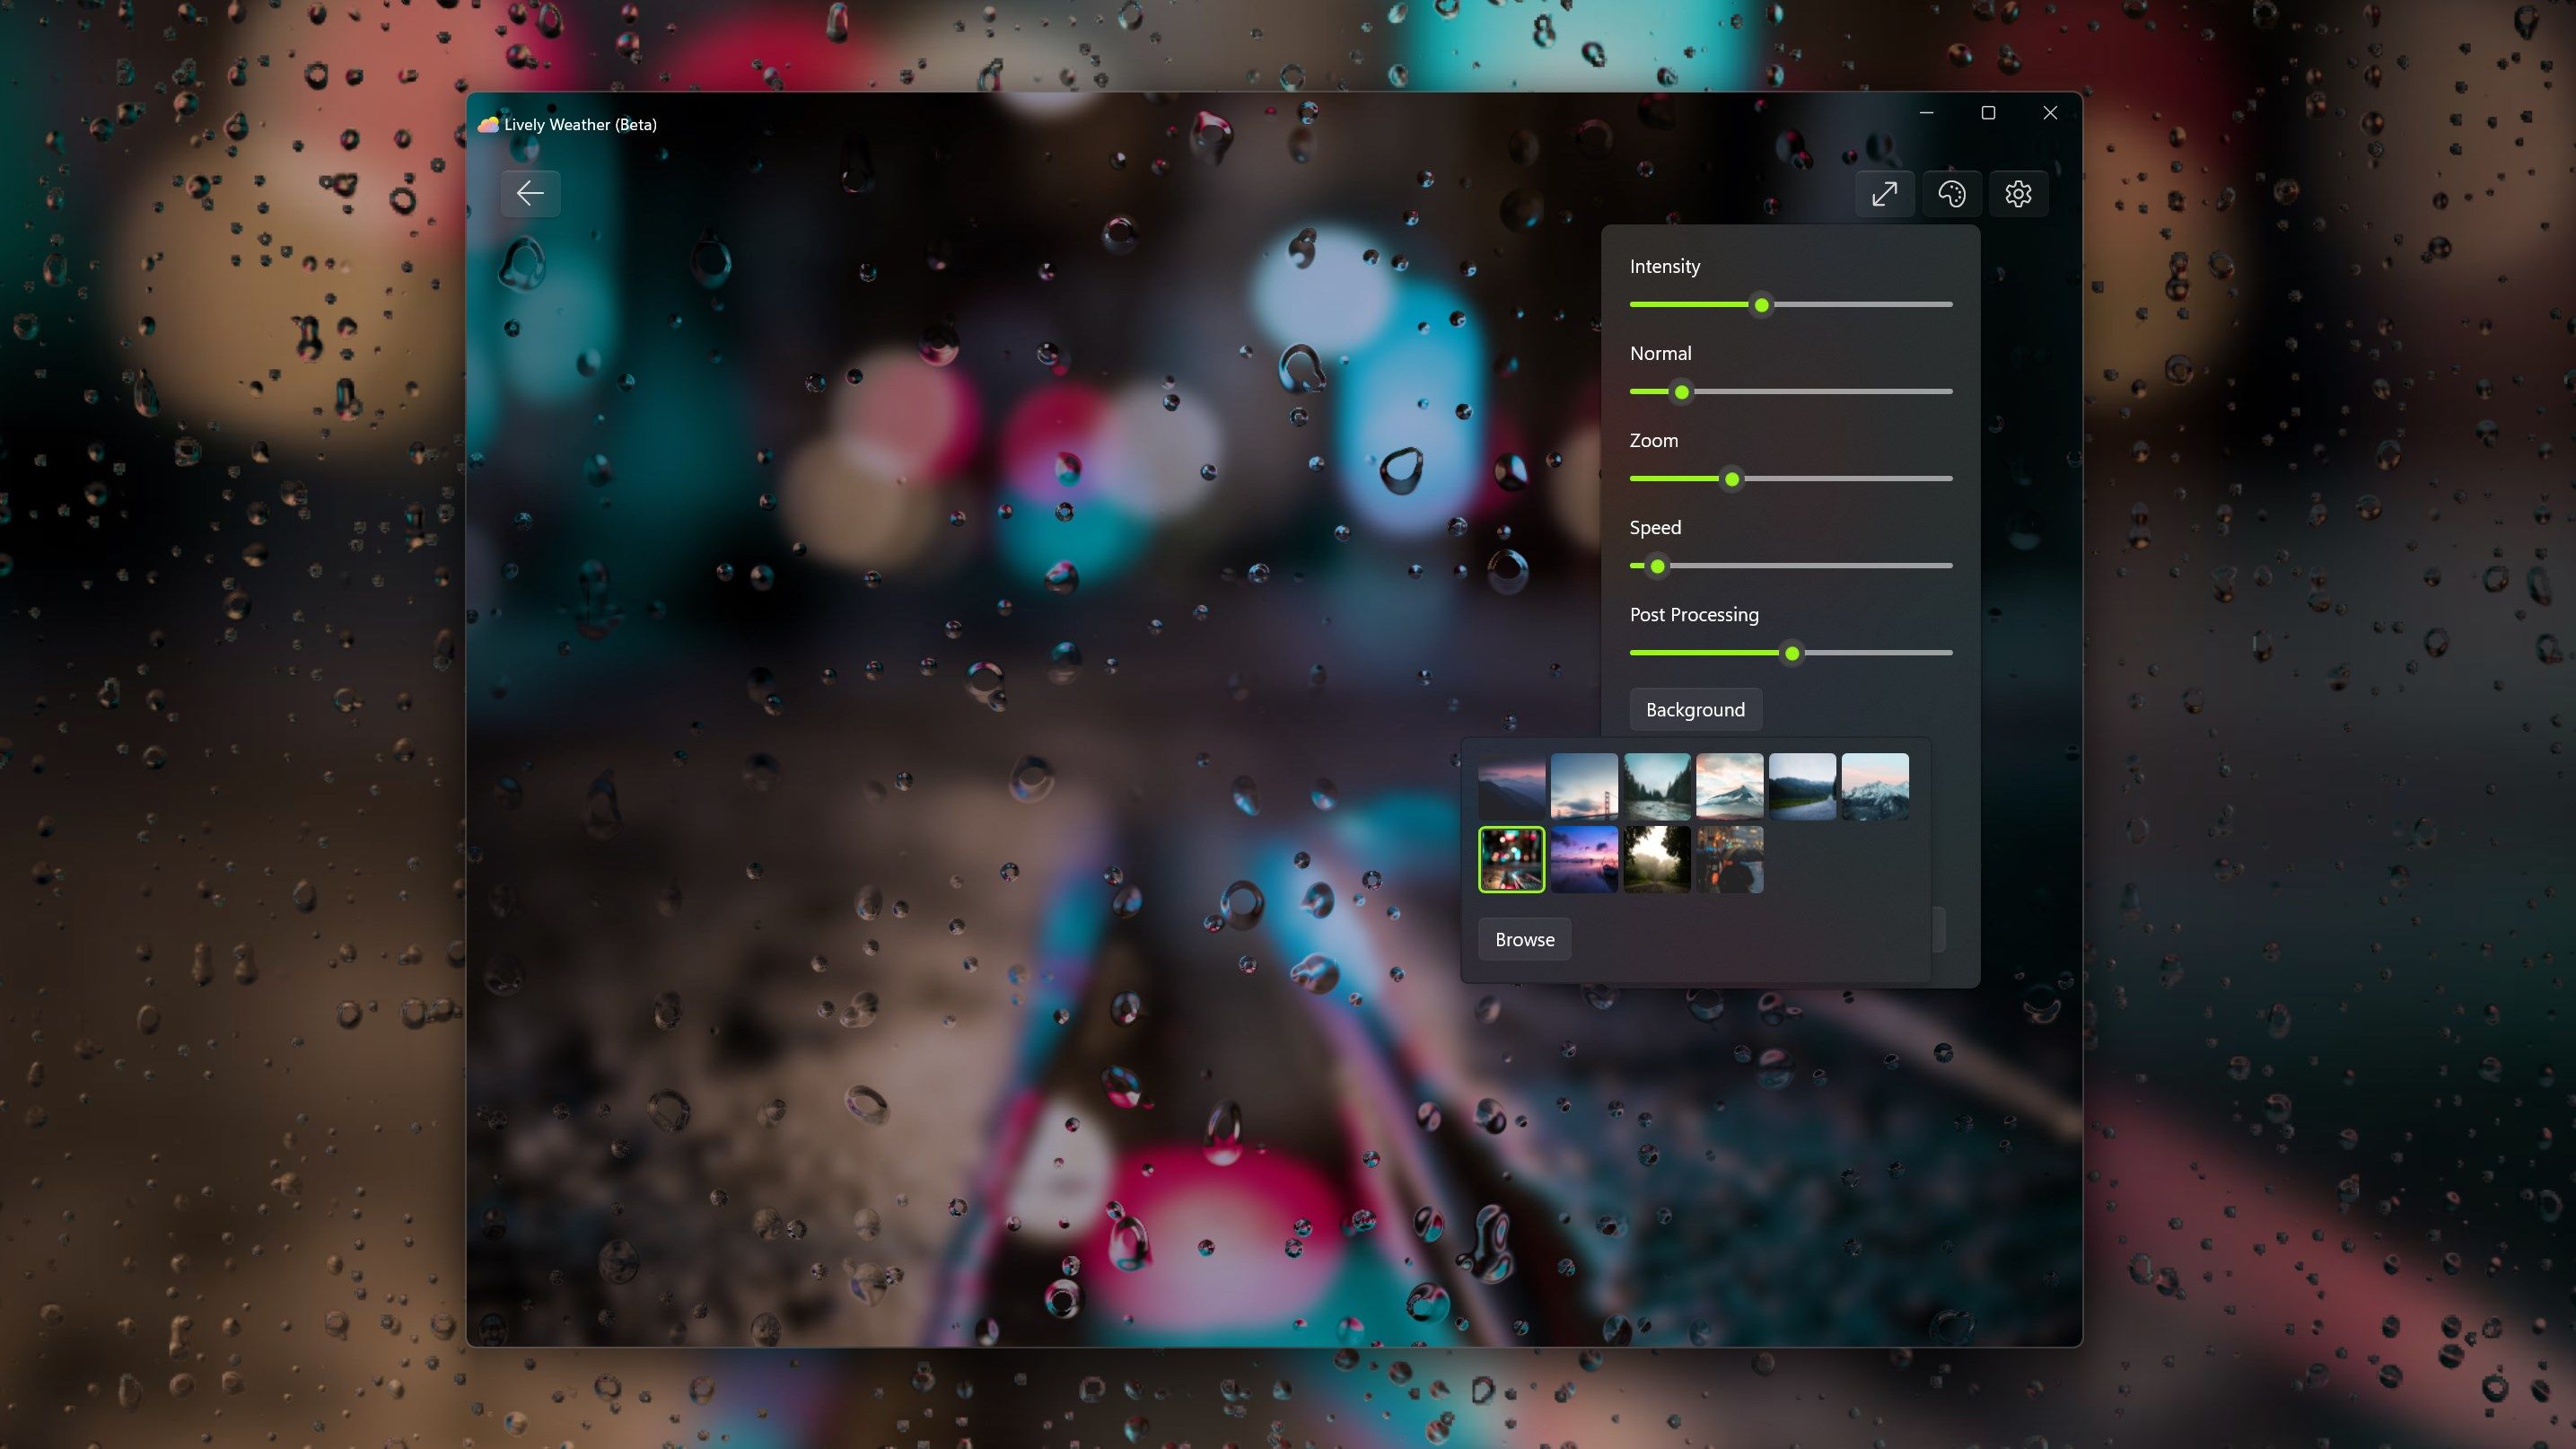 Customize weather in Screensaver mode